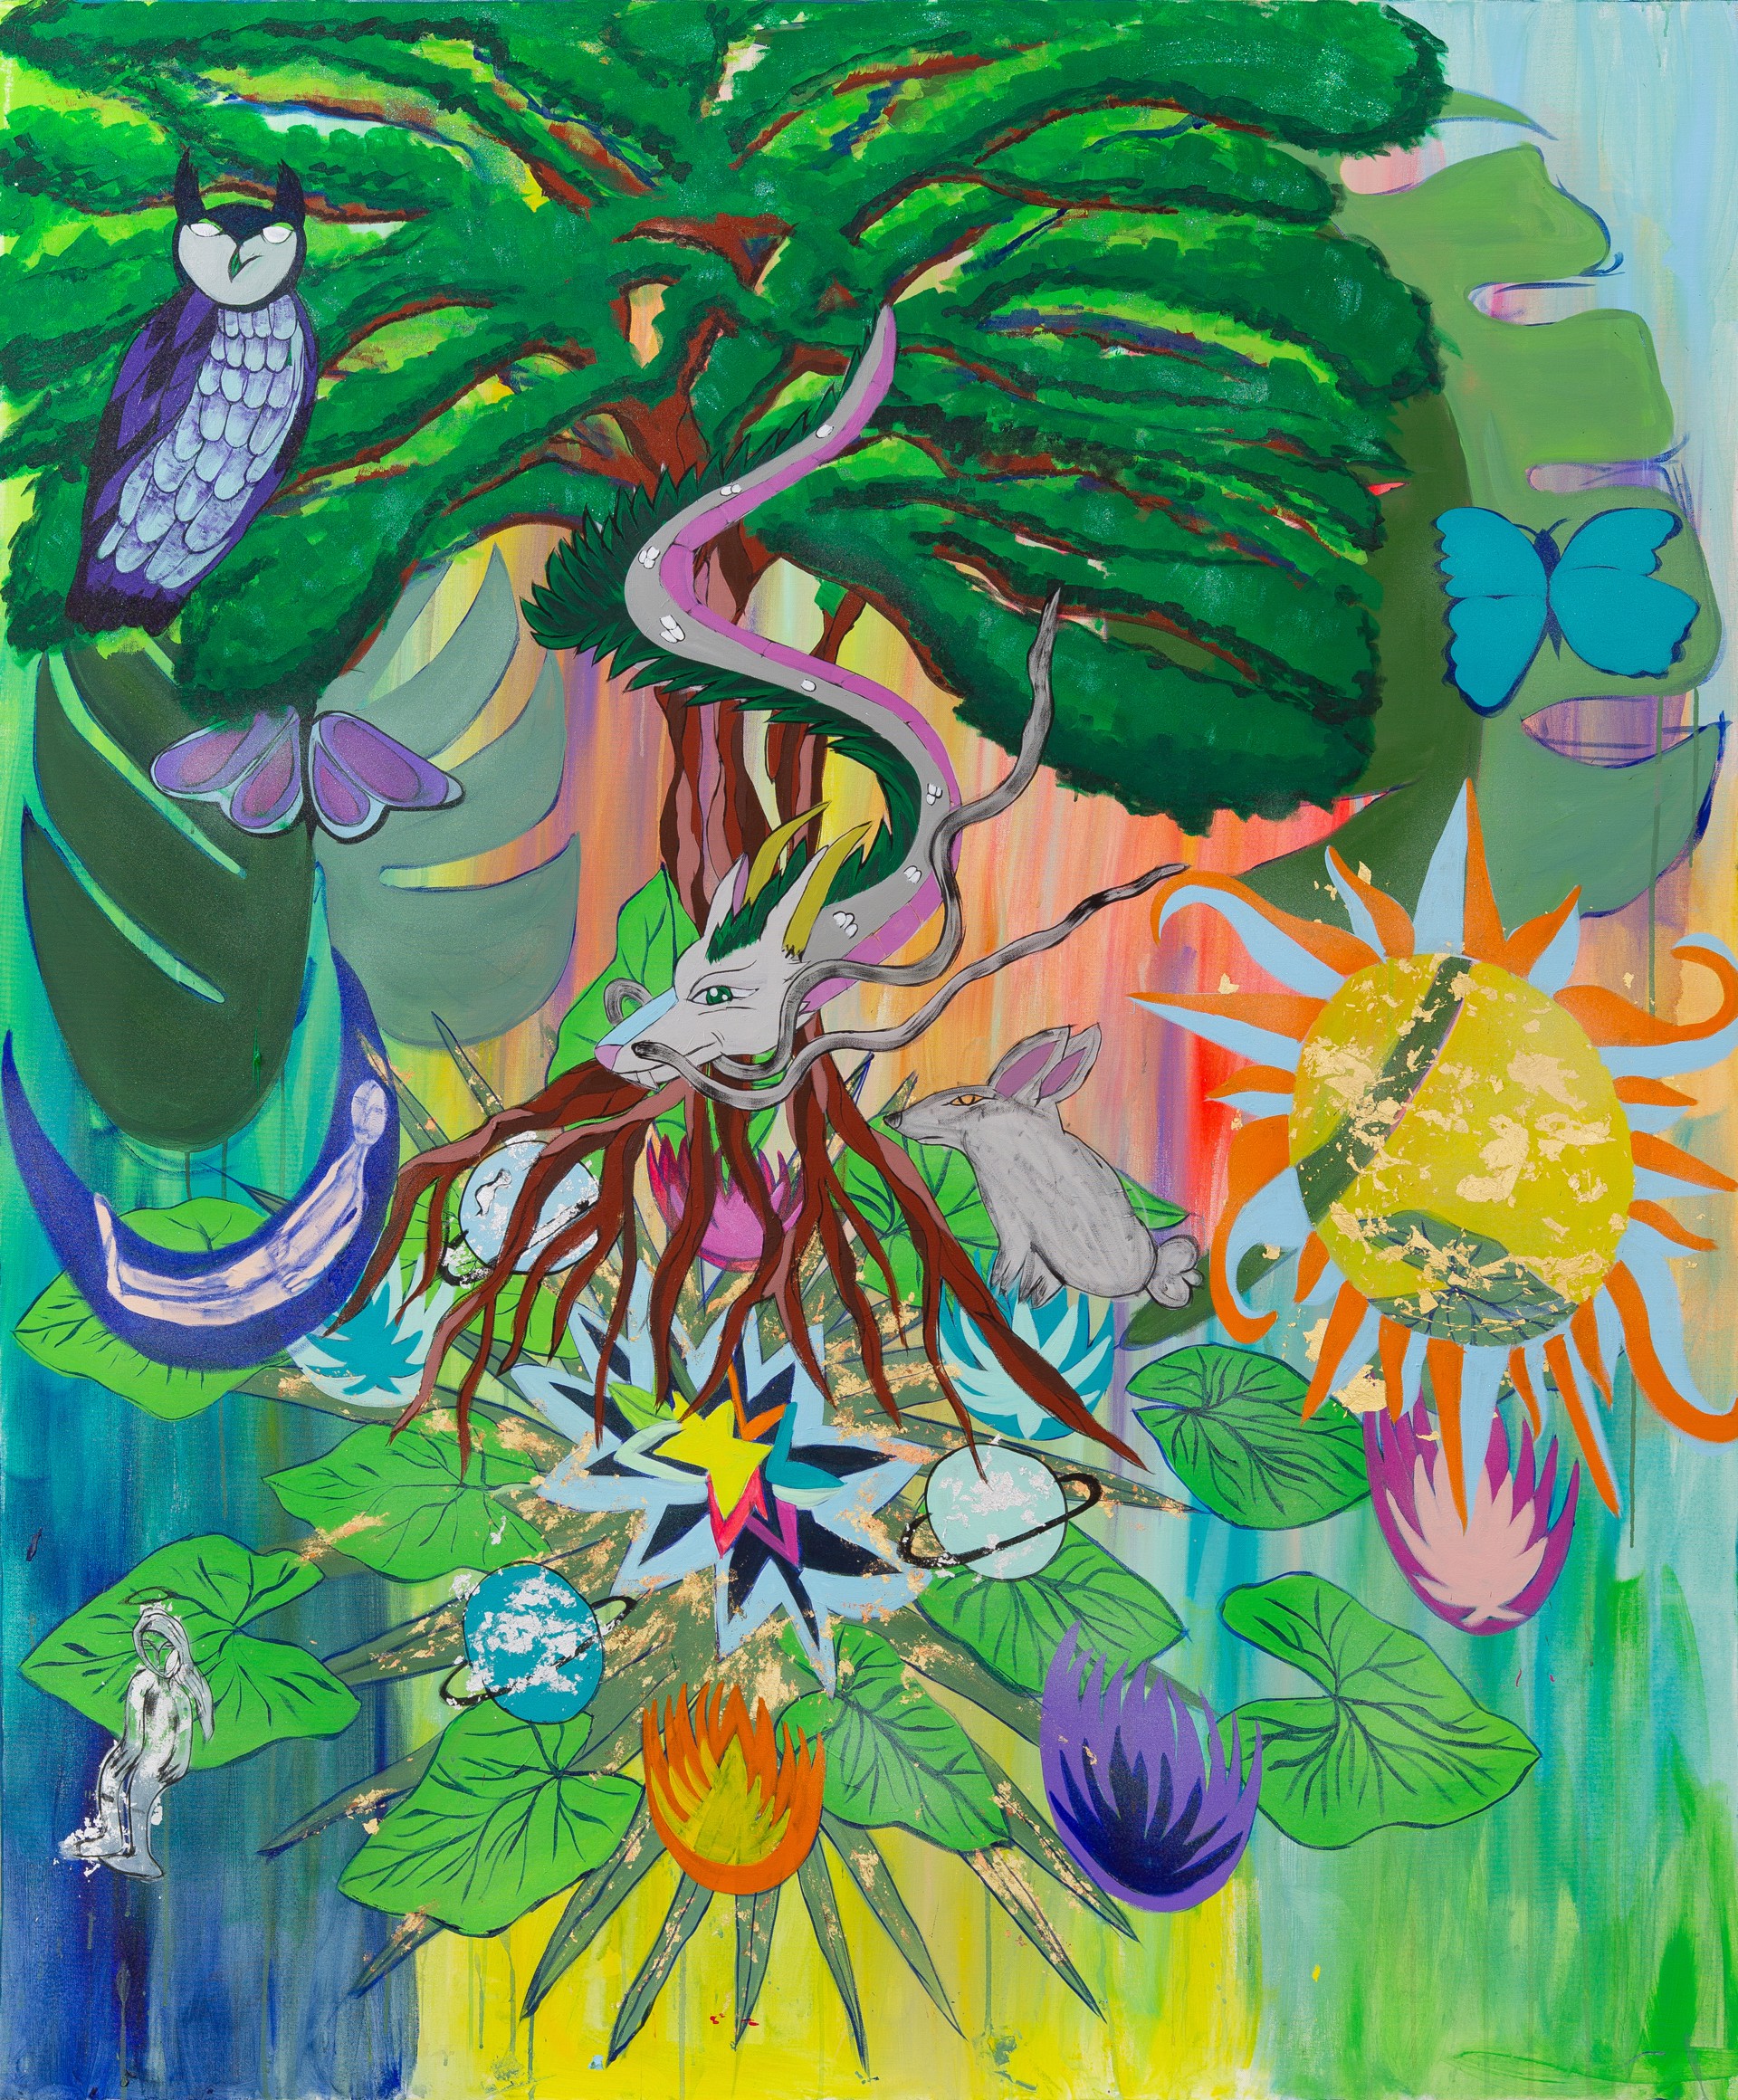 Tree of Life by The Love Child